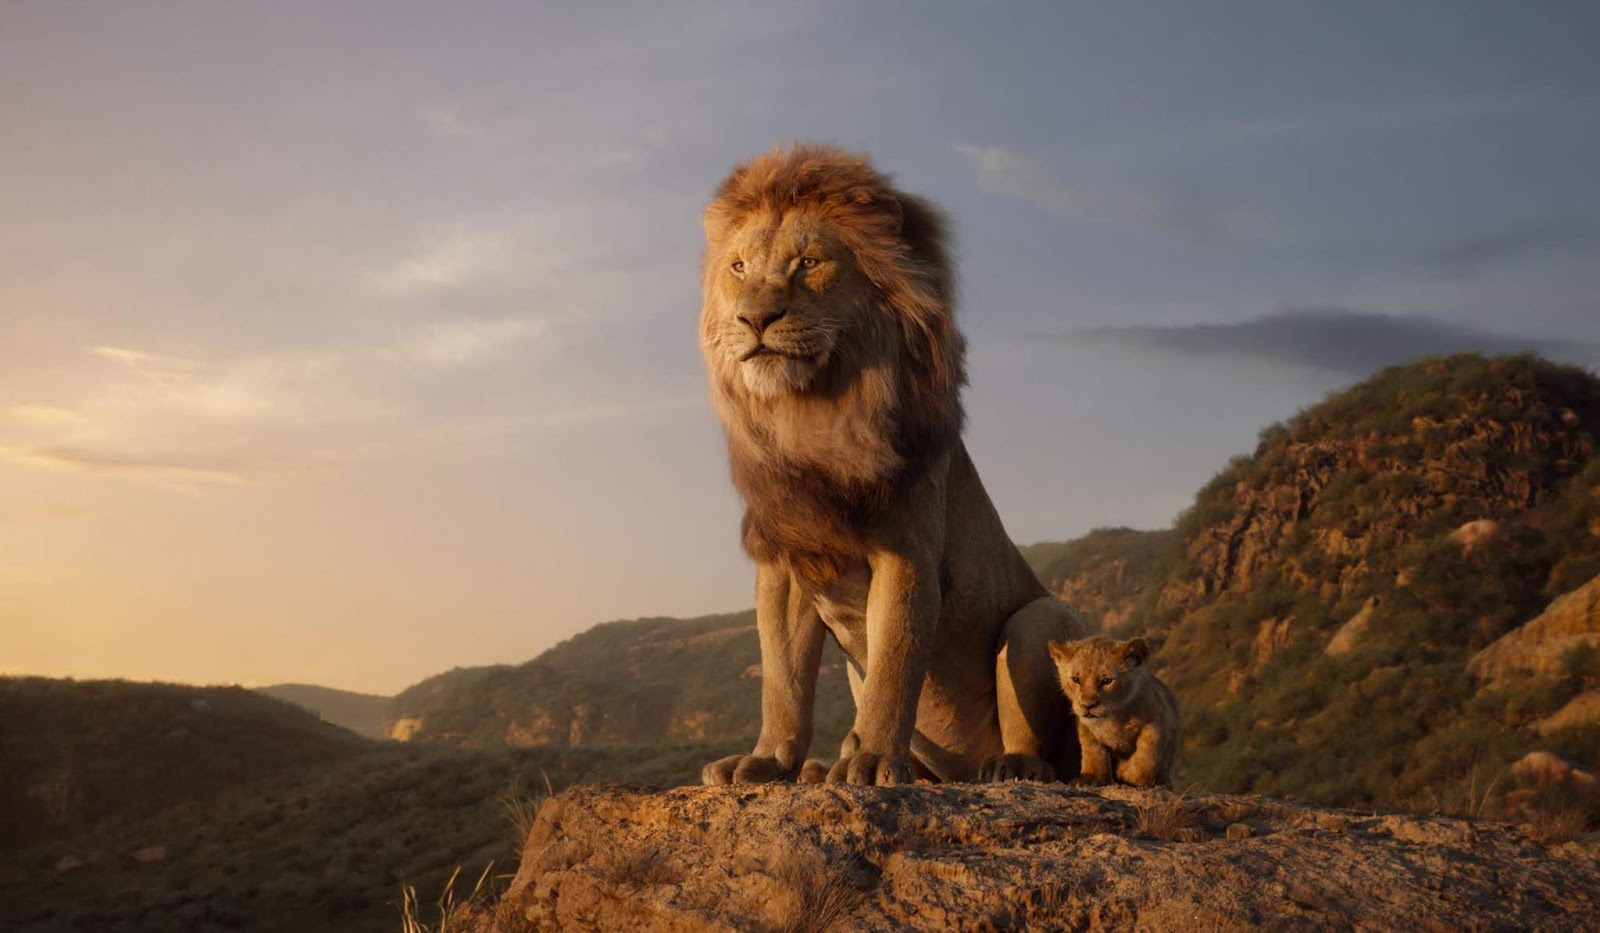 MOVIES: The Lion King - Review